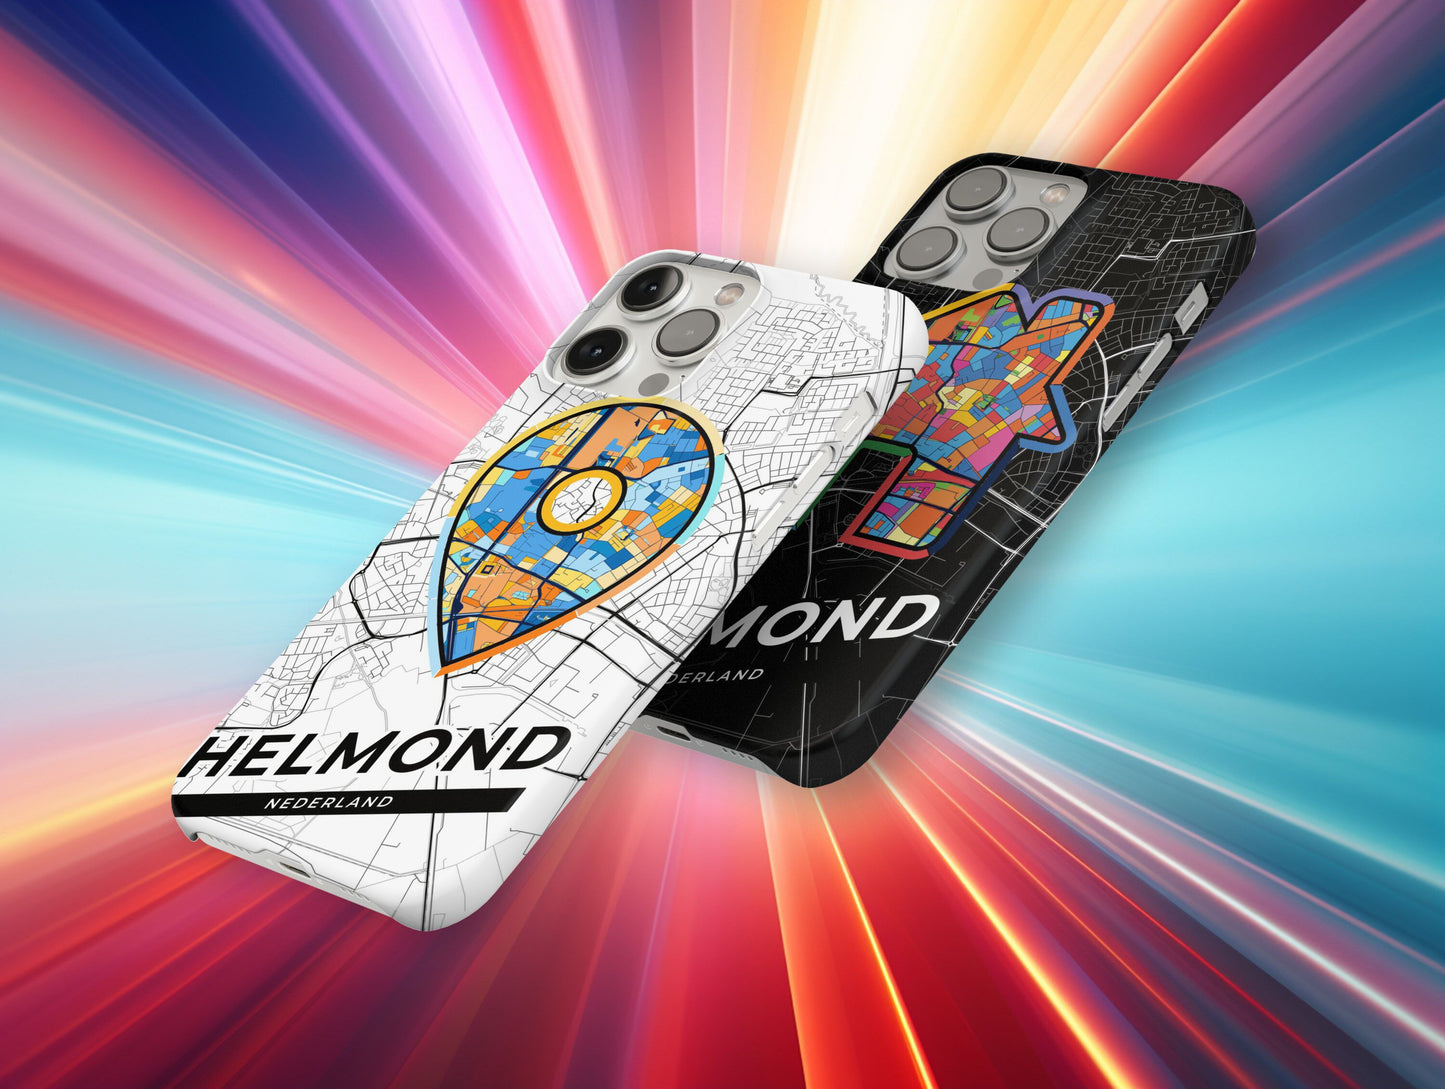 Helmond Netherlands slim phone case with colorful icon. Birthday, wedding or housewarming gift. Couple match cases.